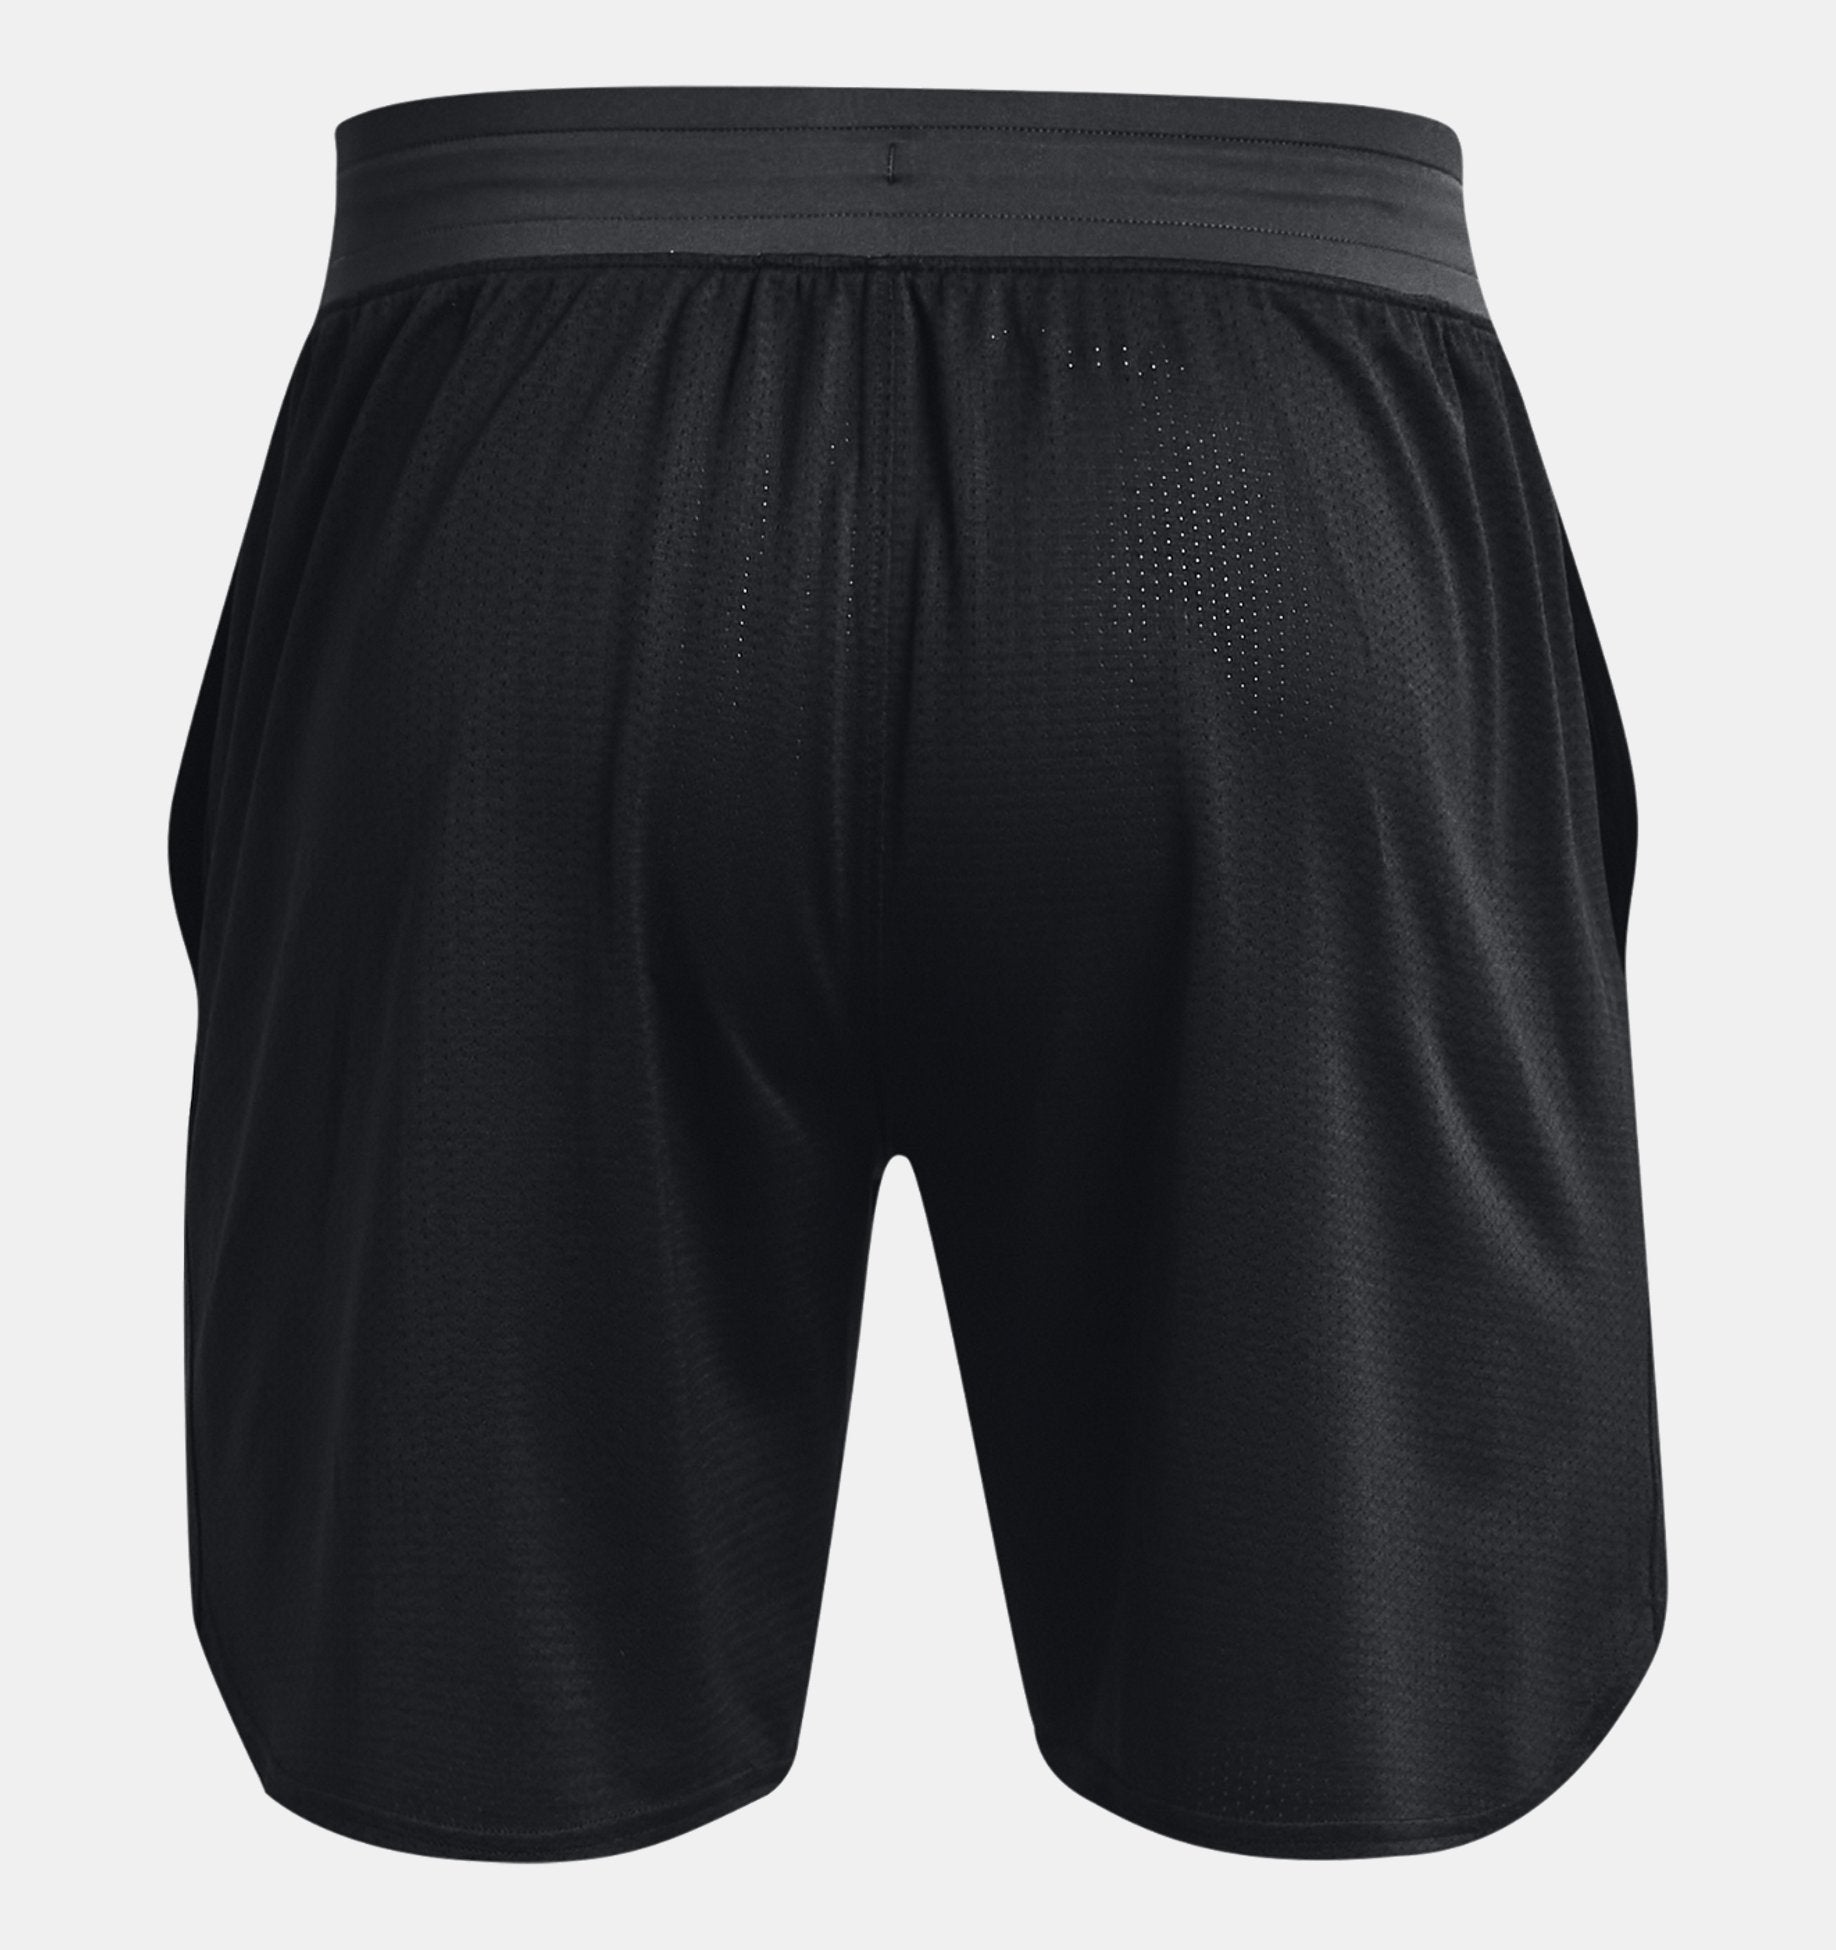 UAA-B8 (Mens project rock mesh shorts black/white) 82292608 UNDER ARMOUR